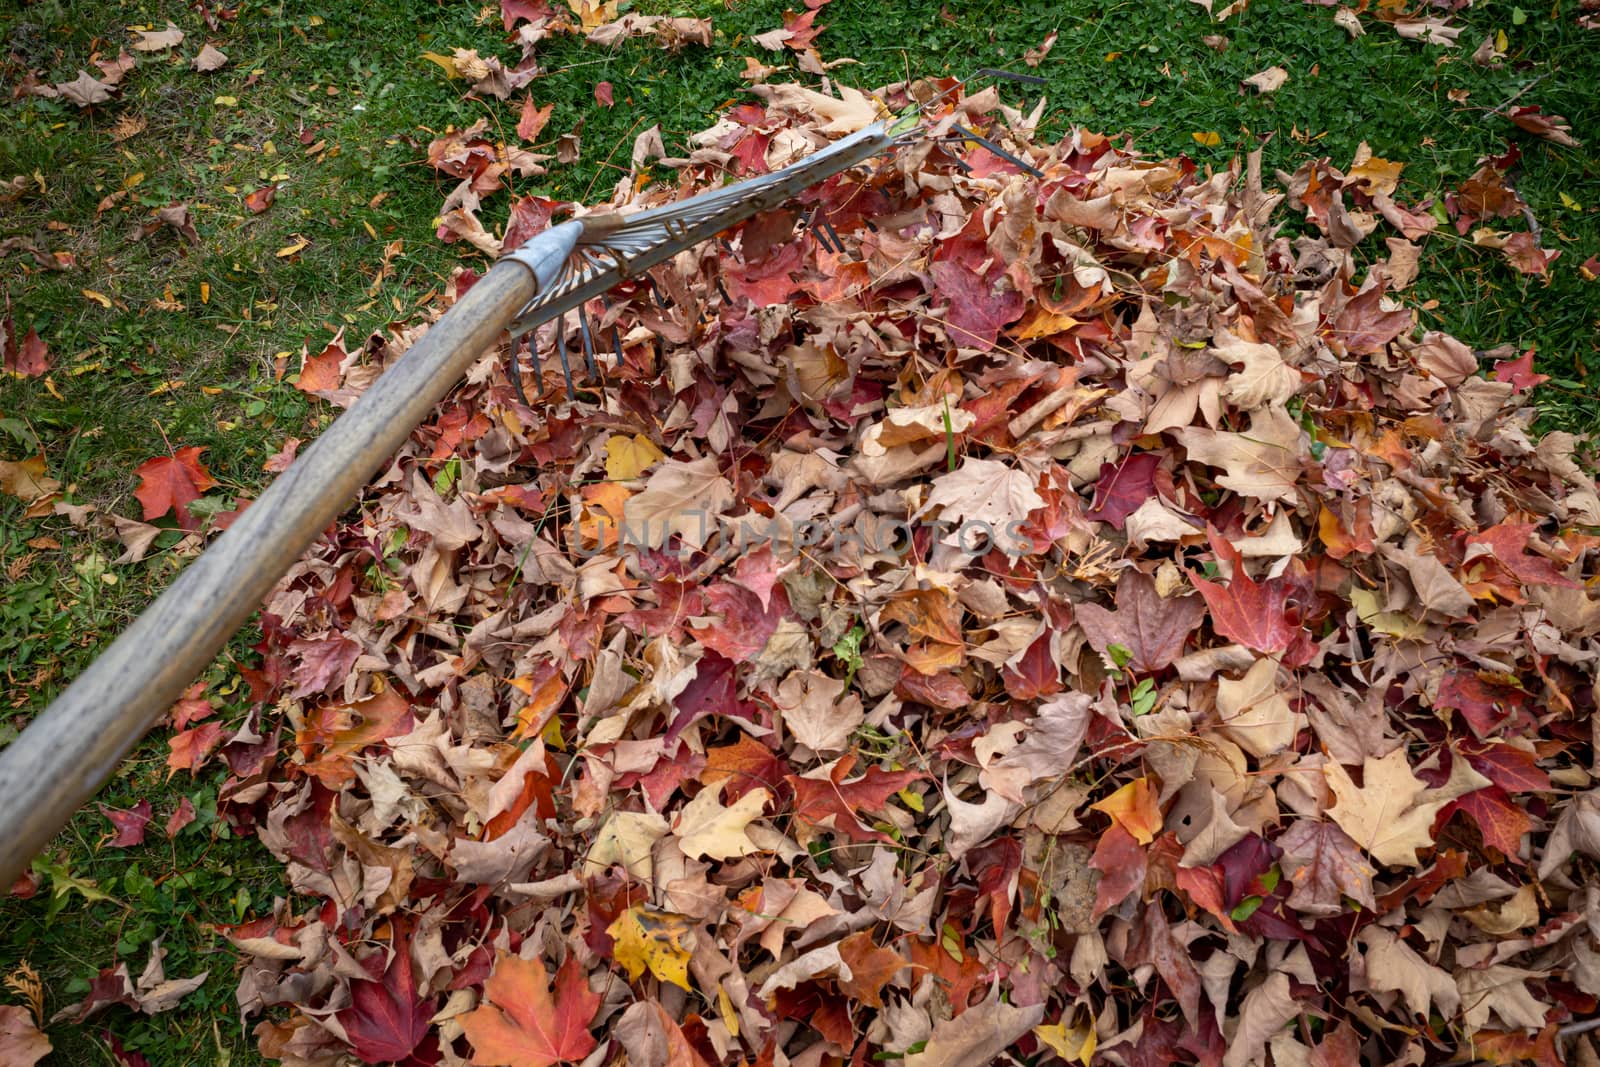 An image shows a rake pushing leaves into a pile from the point of view of someone doing the yard work.